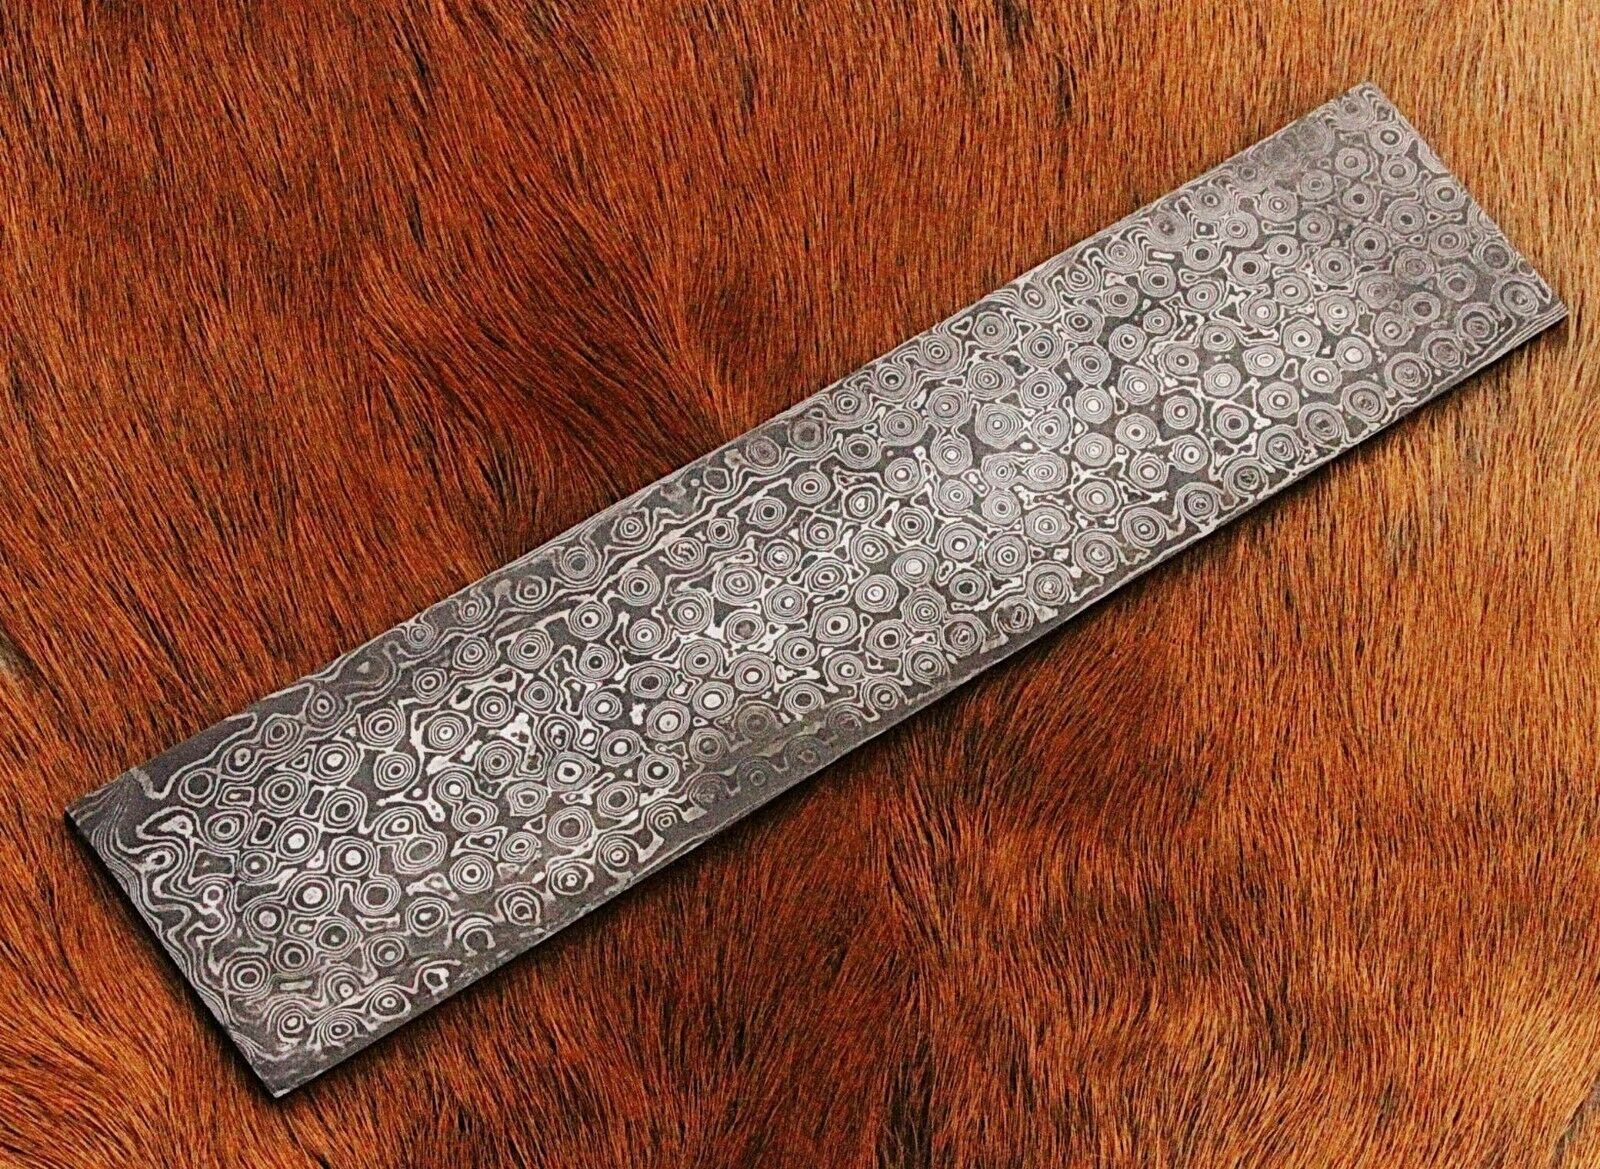 10X2 HAND FORGED DAMASCUS STEEL Annealed Billet/Bar Knife Making Supply Any Tool